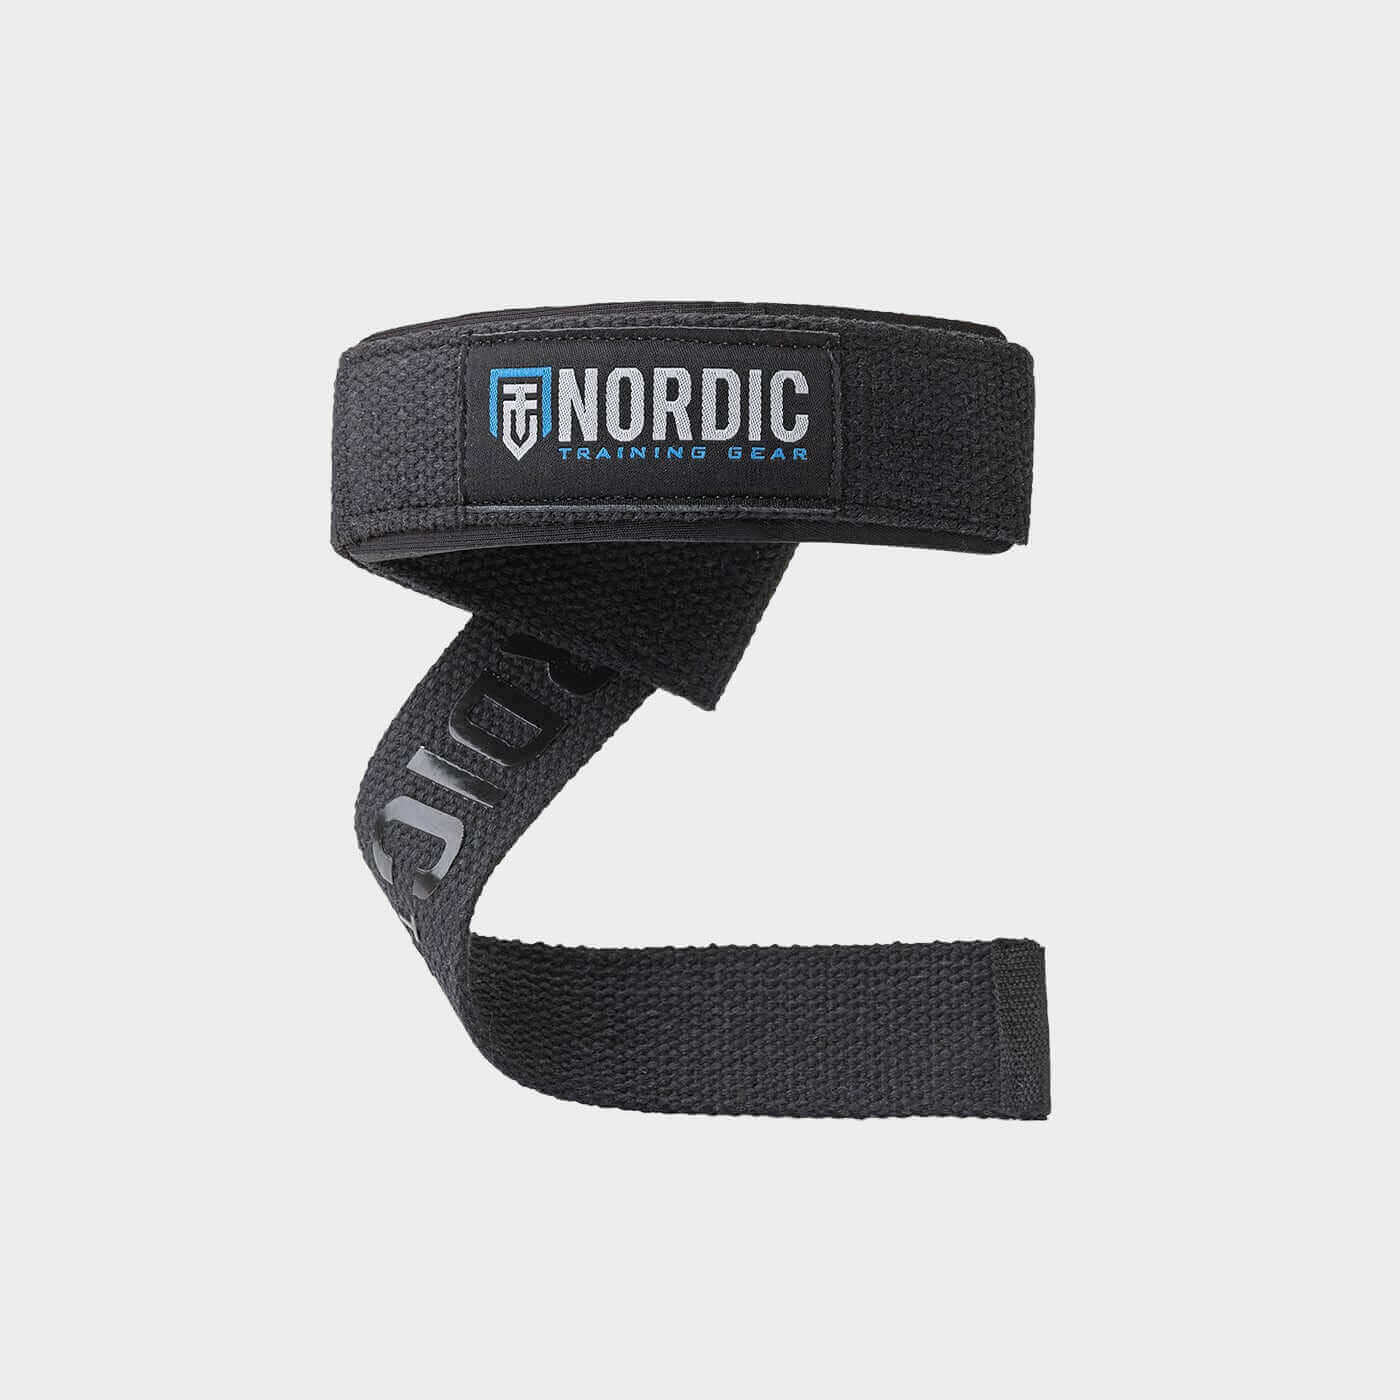 Lifting Straps Silicone Grip